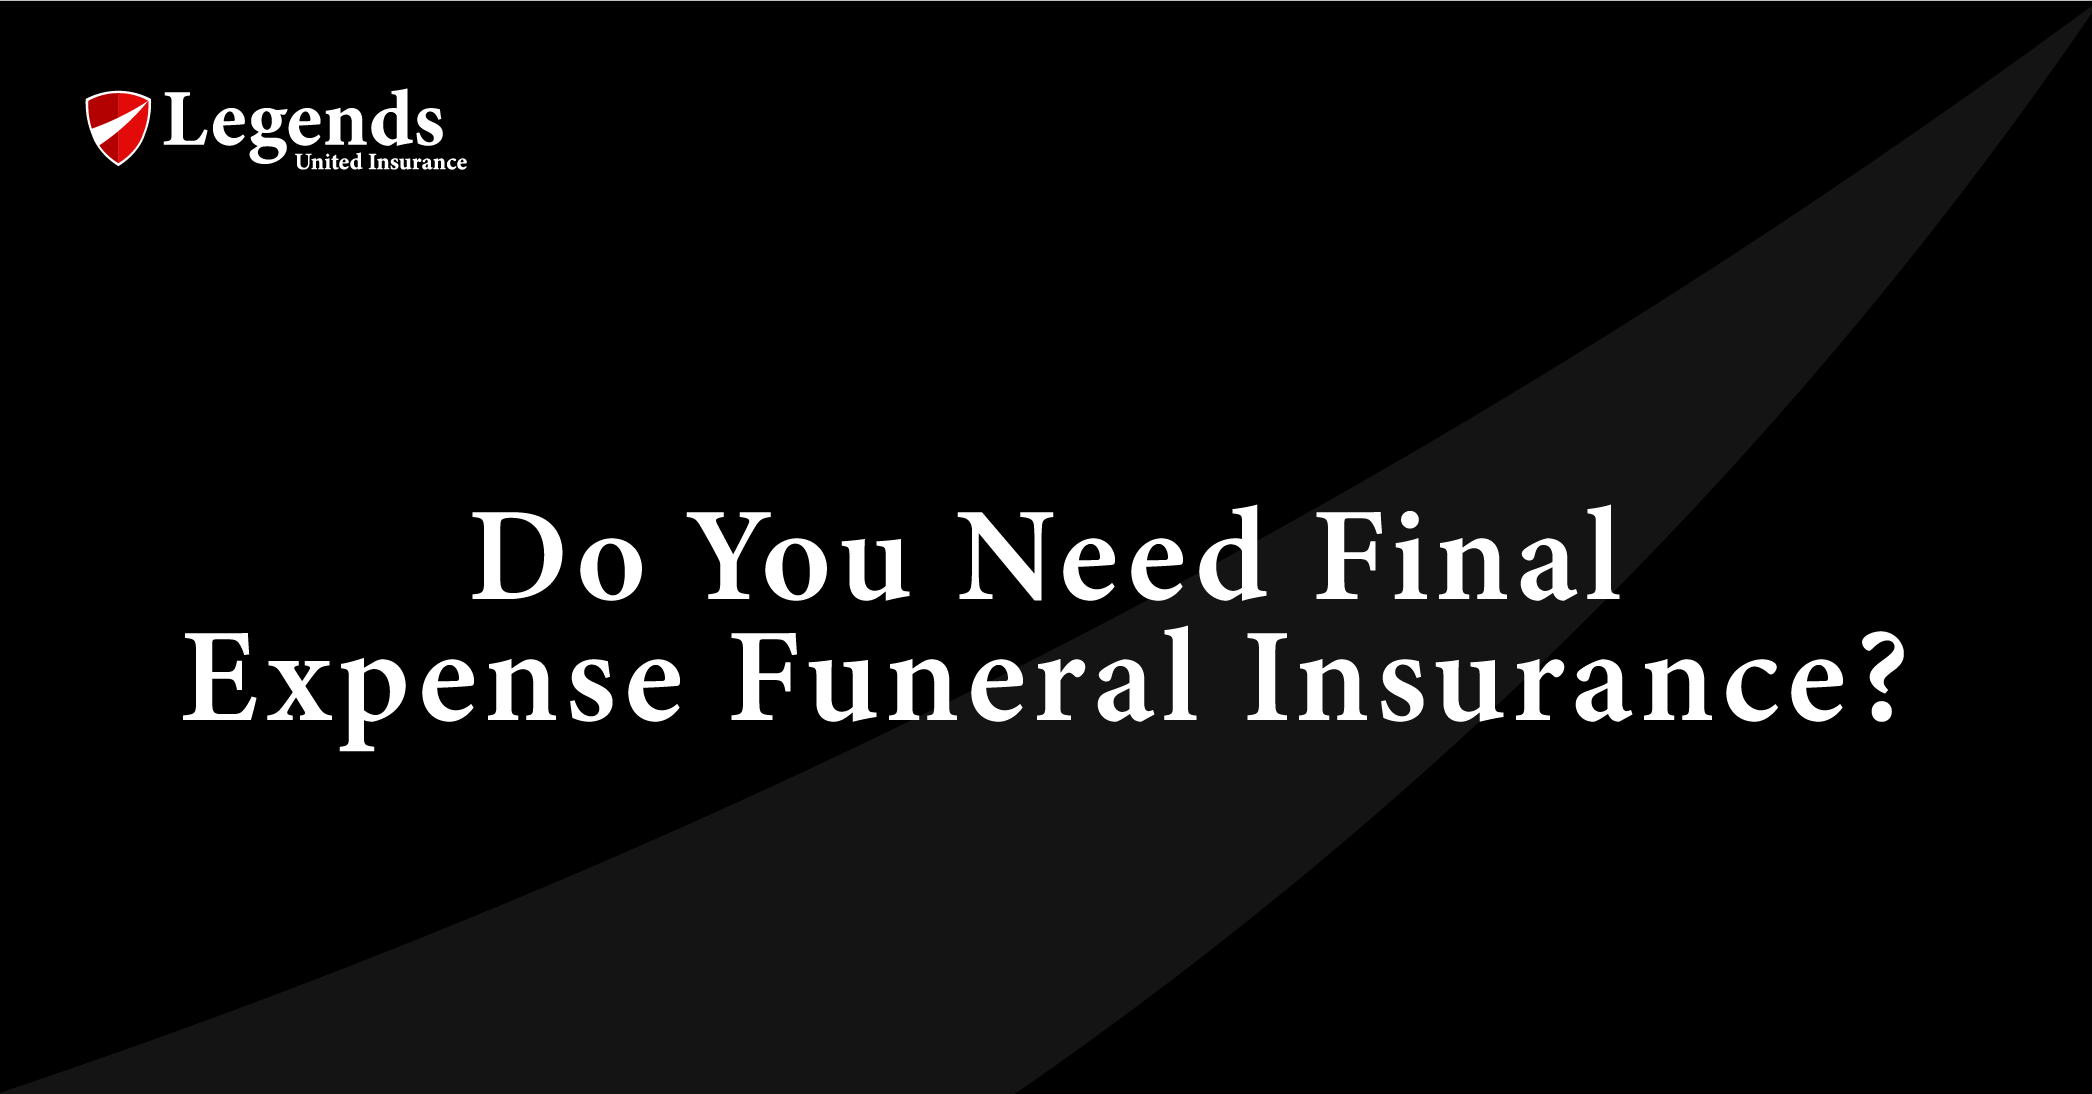 Final expense funeral insurance could be a perfect solution for your needs. Here’s what you need to know about this product.